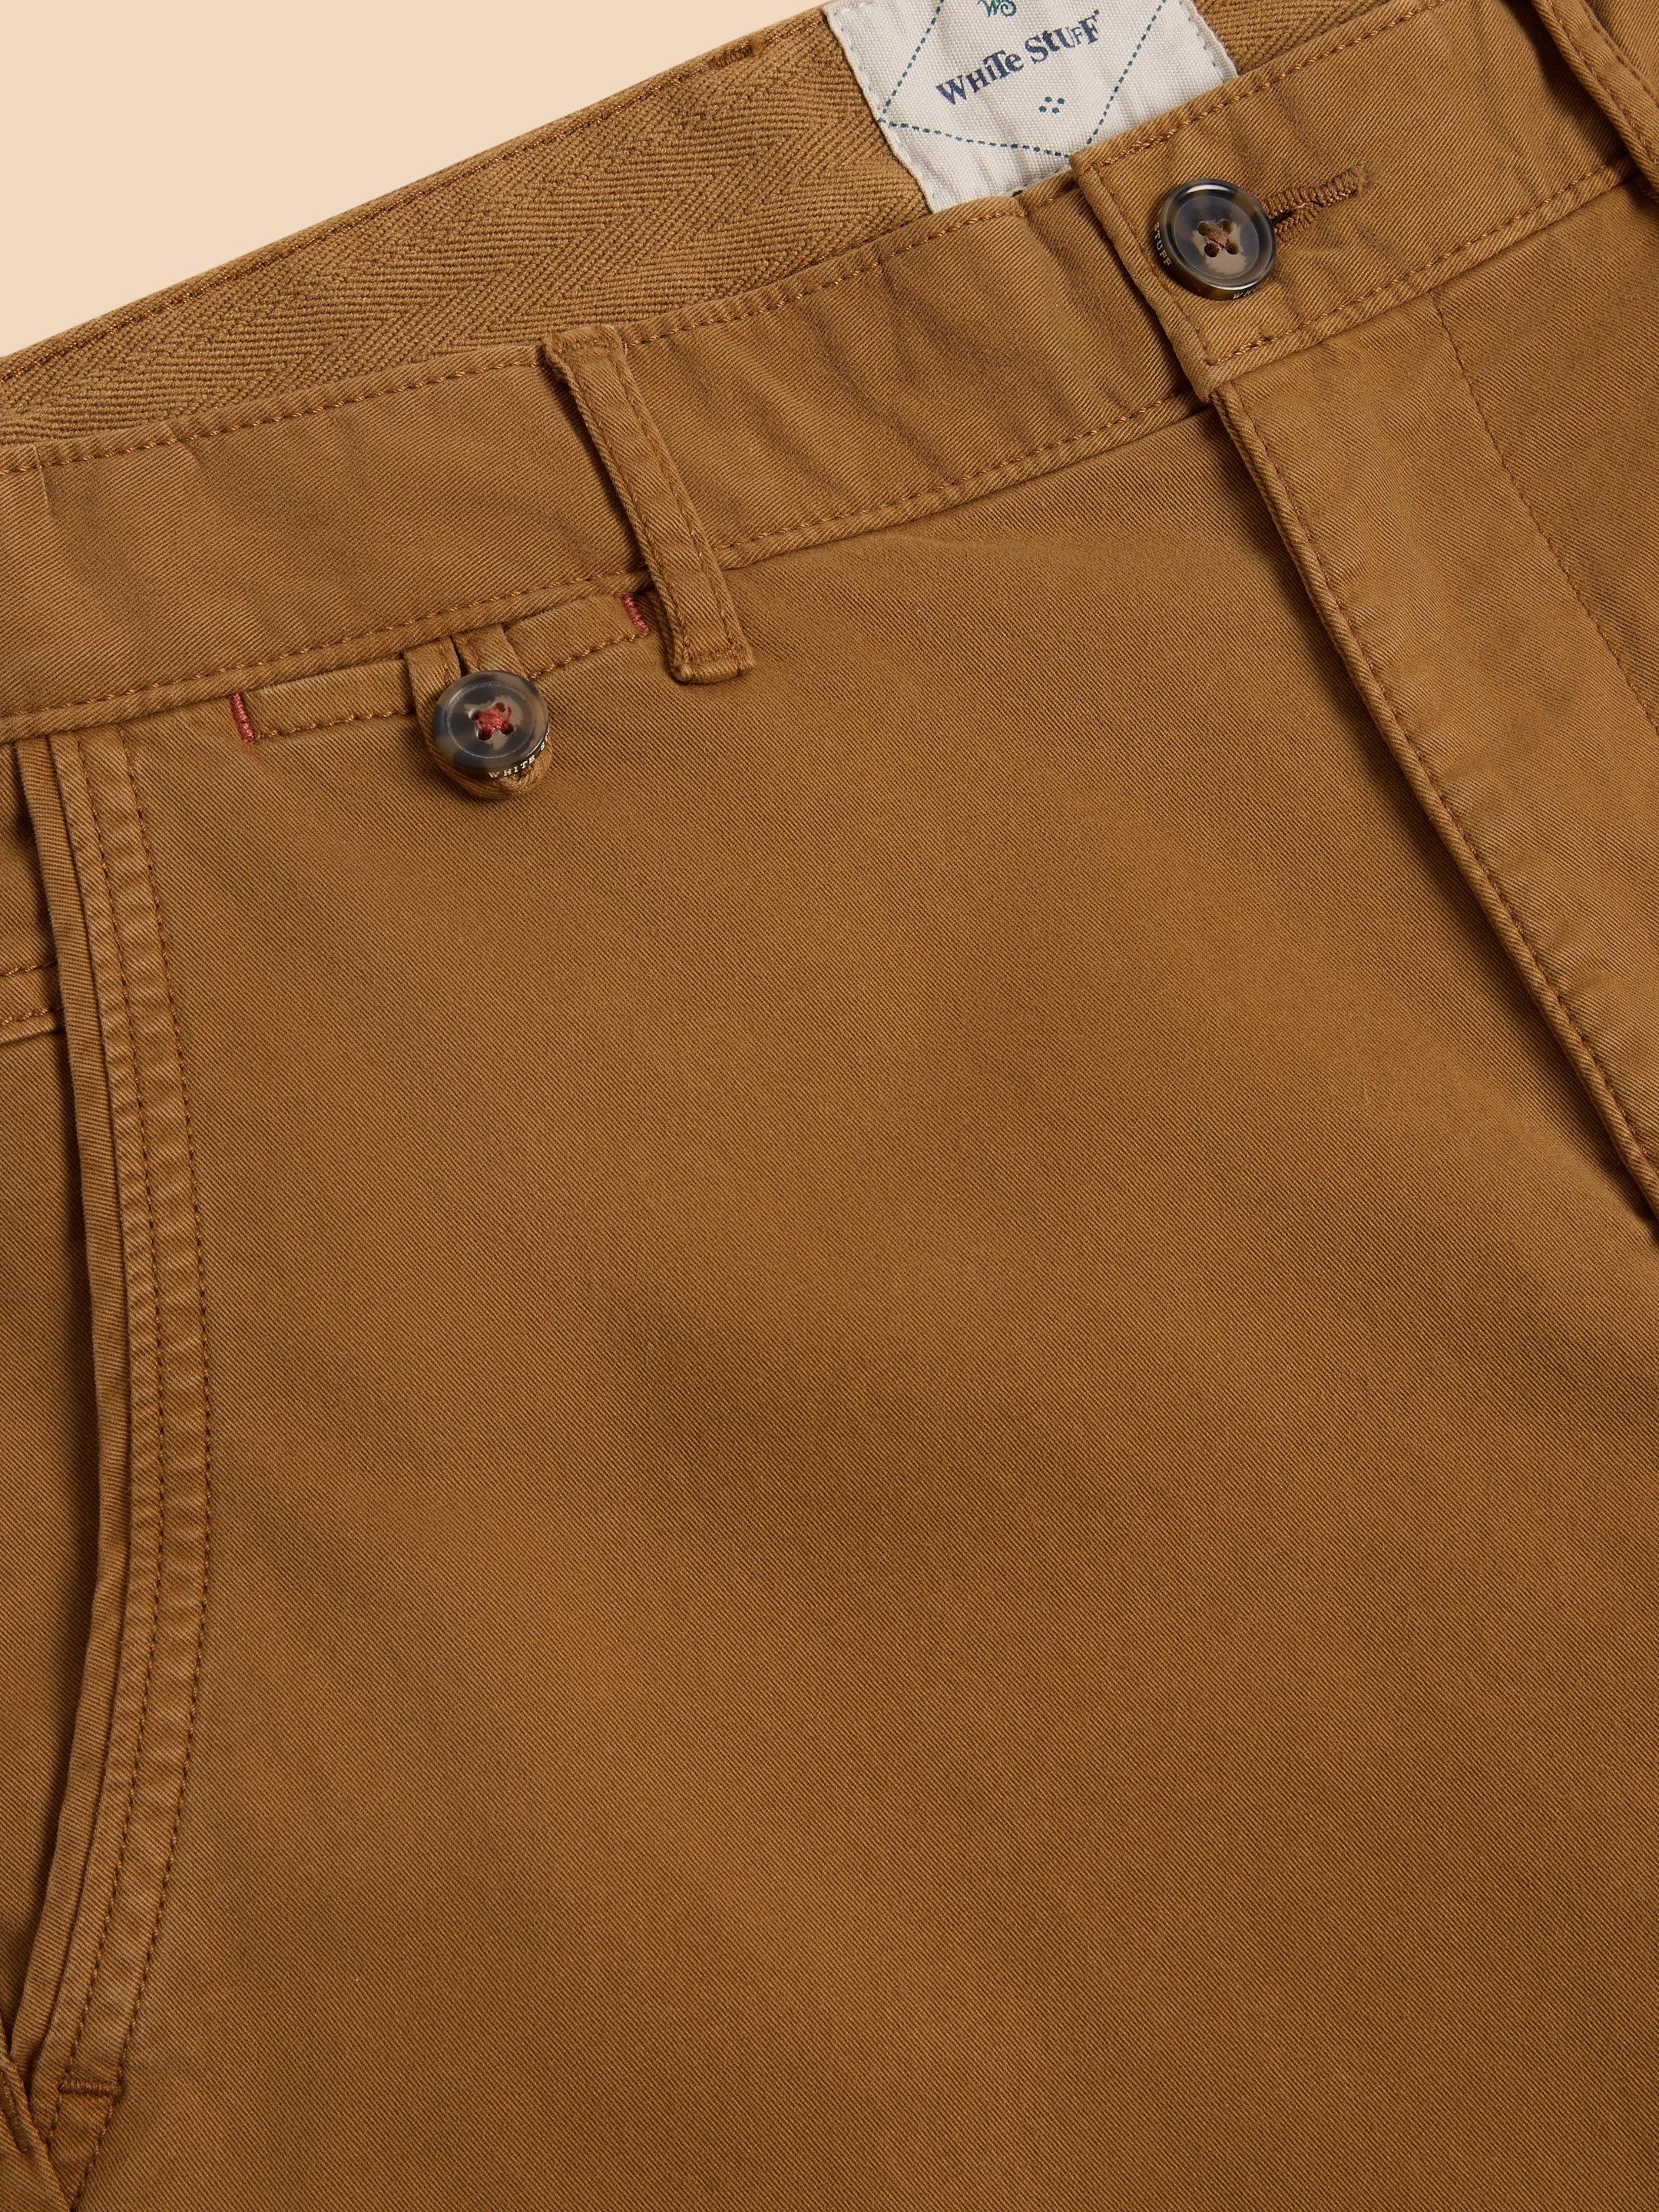 Sutton Organic Chino Trouser in MID BROWN - FLAT DETAIL